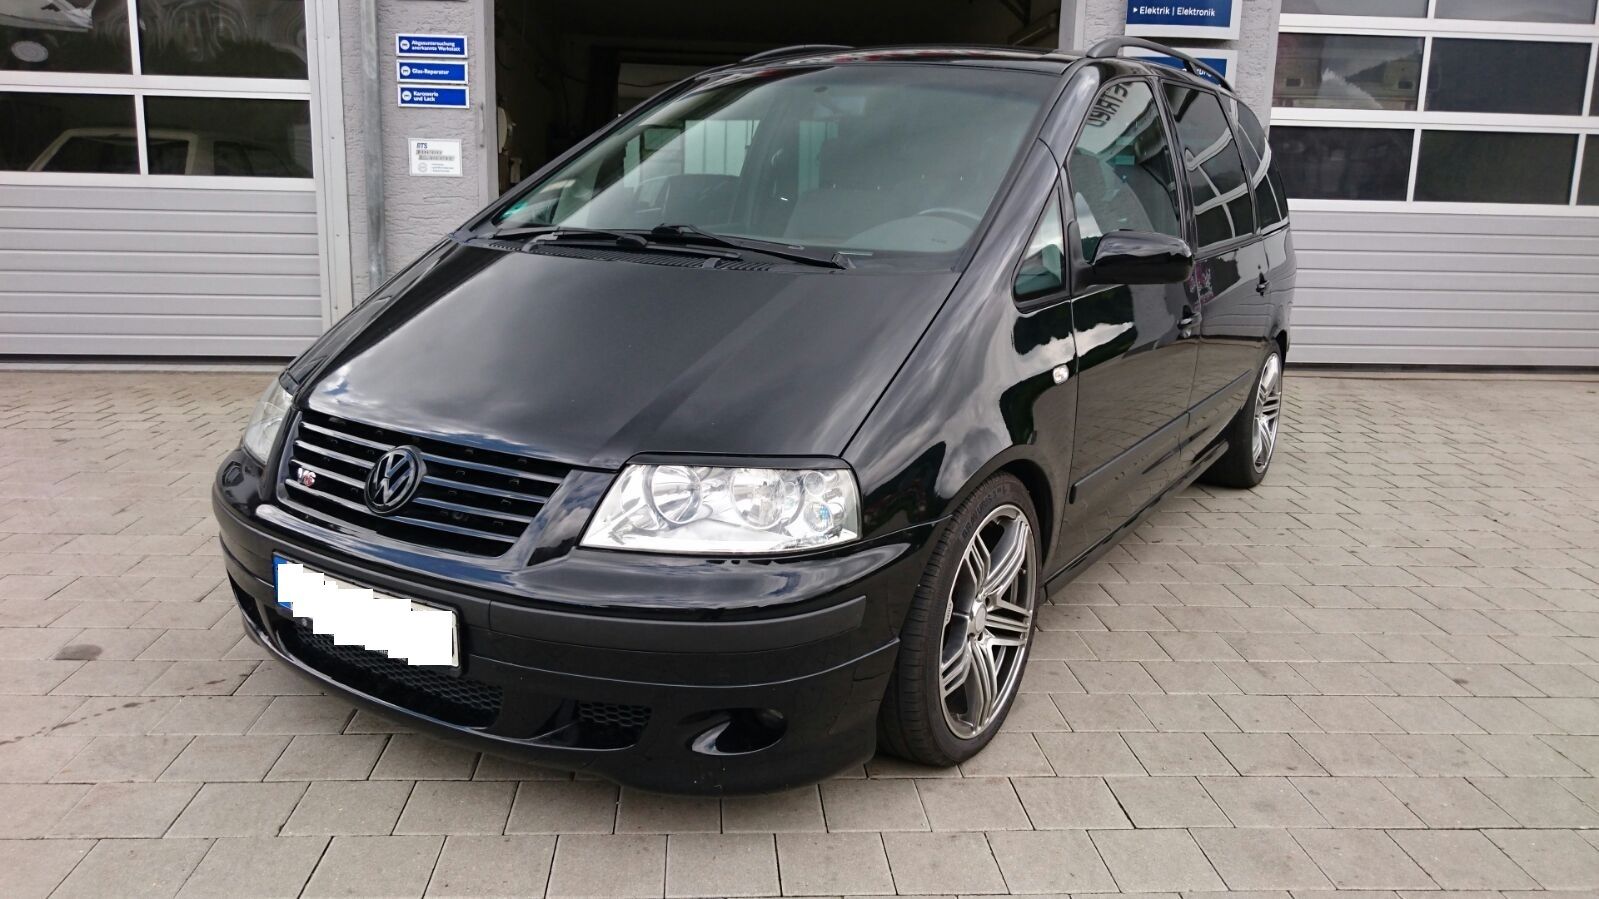 Volkswagen Sharan Tuned to 440 PS Thanks to Turbofed 2.8